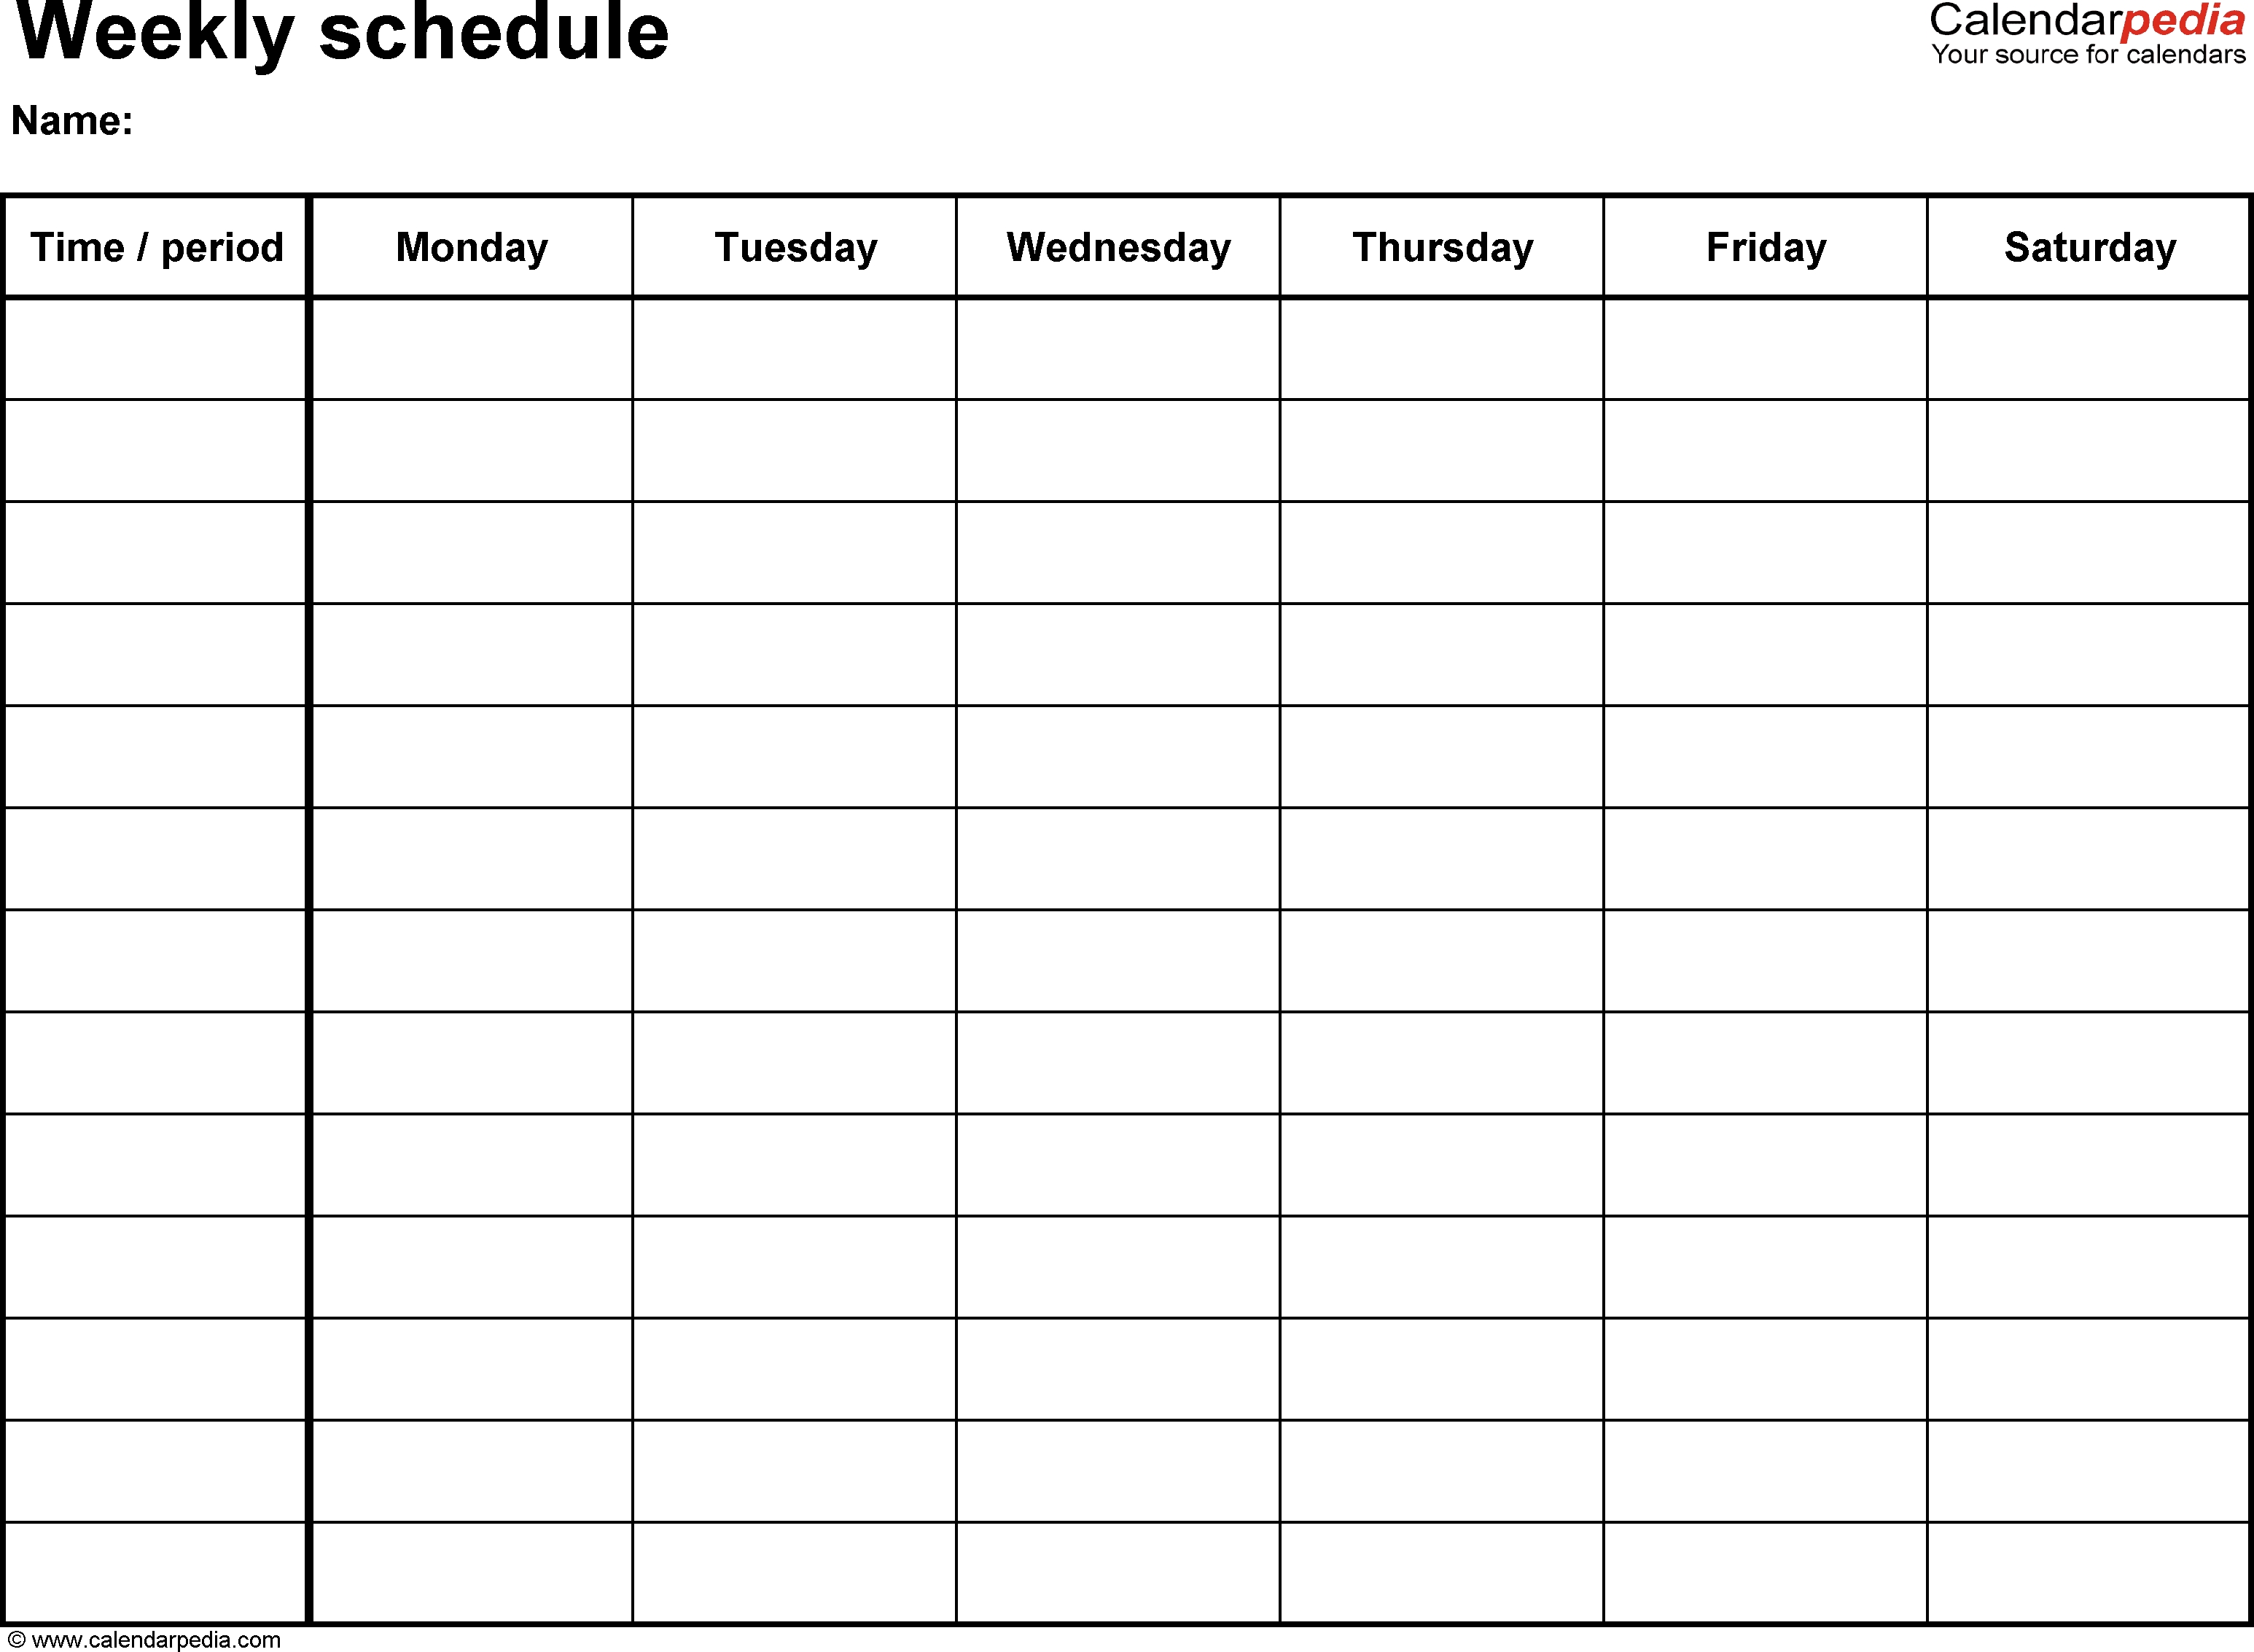 Free Weekly Schedule Templates For Word - 18 Templates Calendar Template Saturday Through Friday